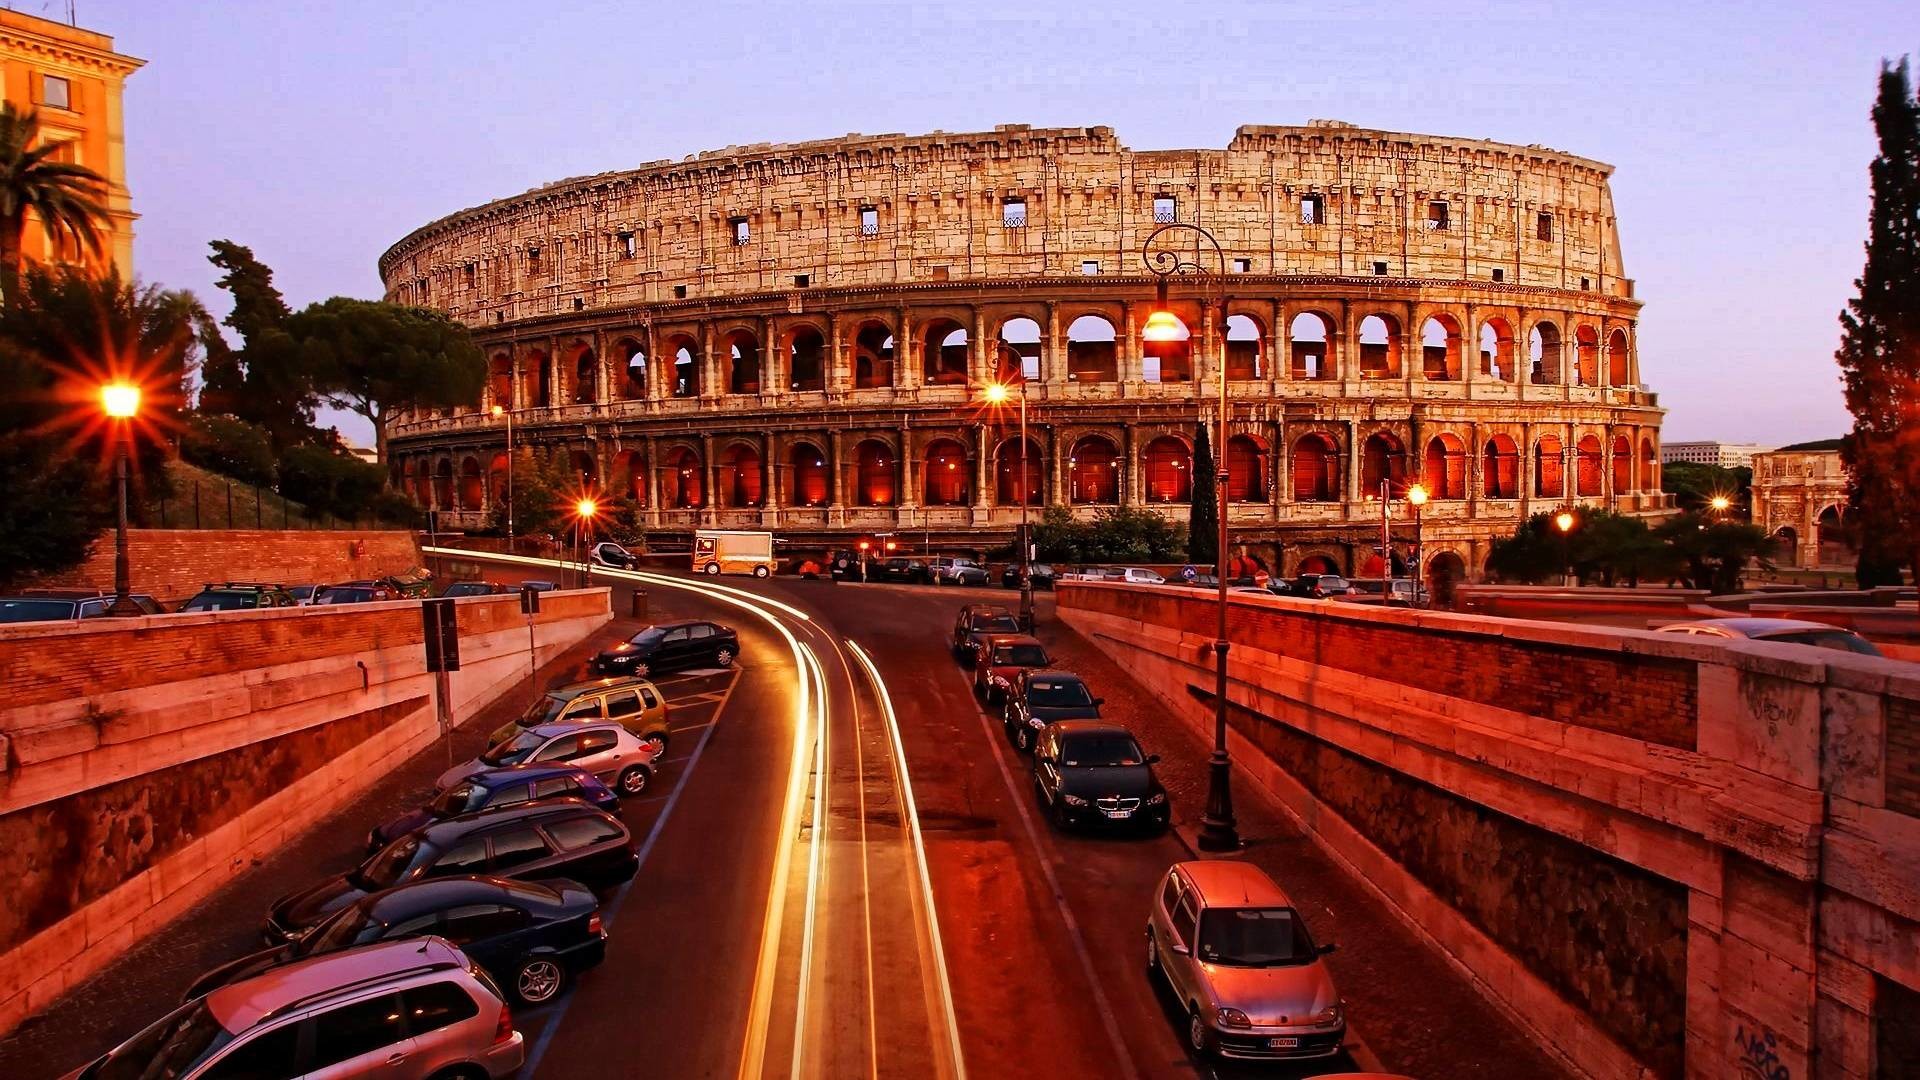 1920x1080 Roman Coliseum hd wallpapers and photos italy rome